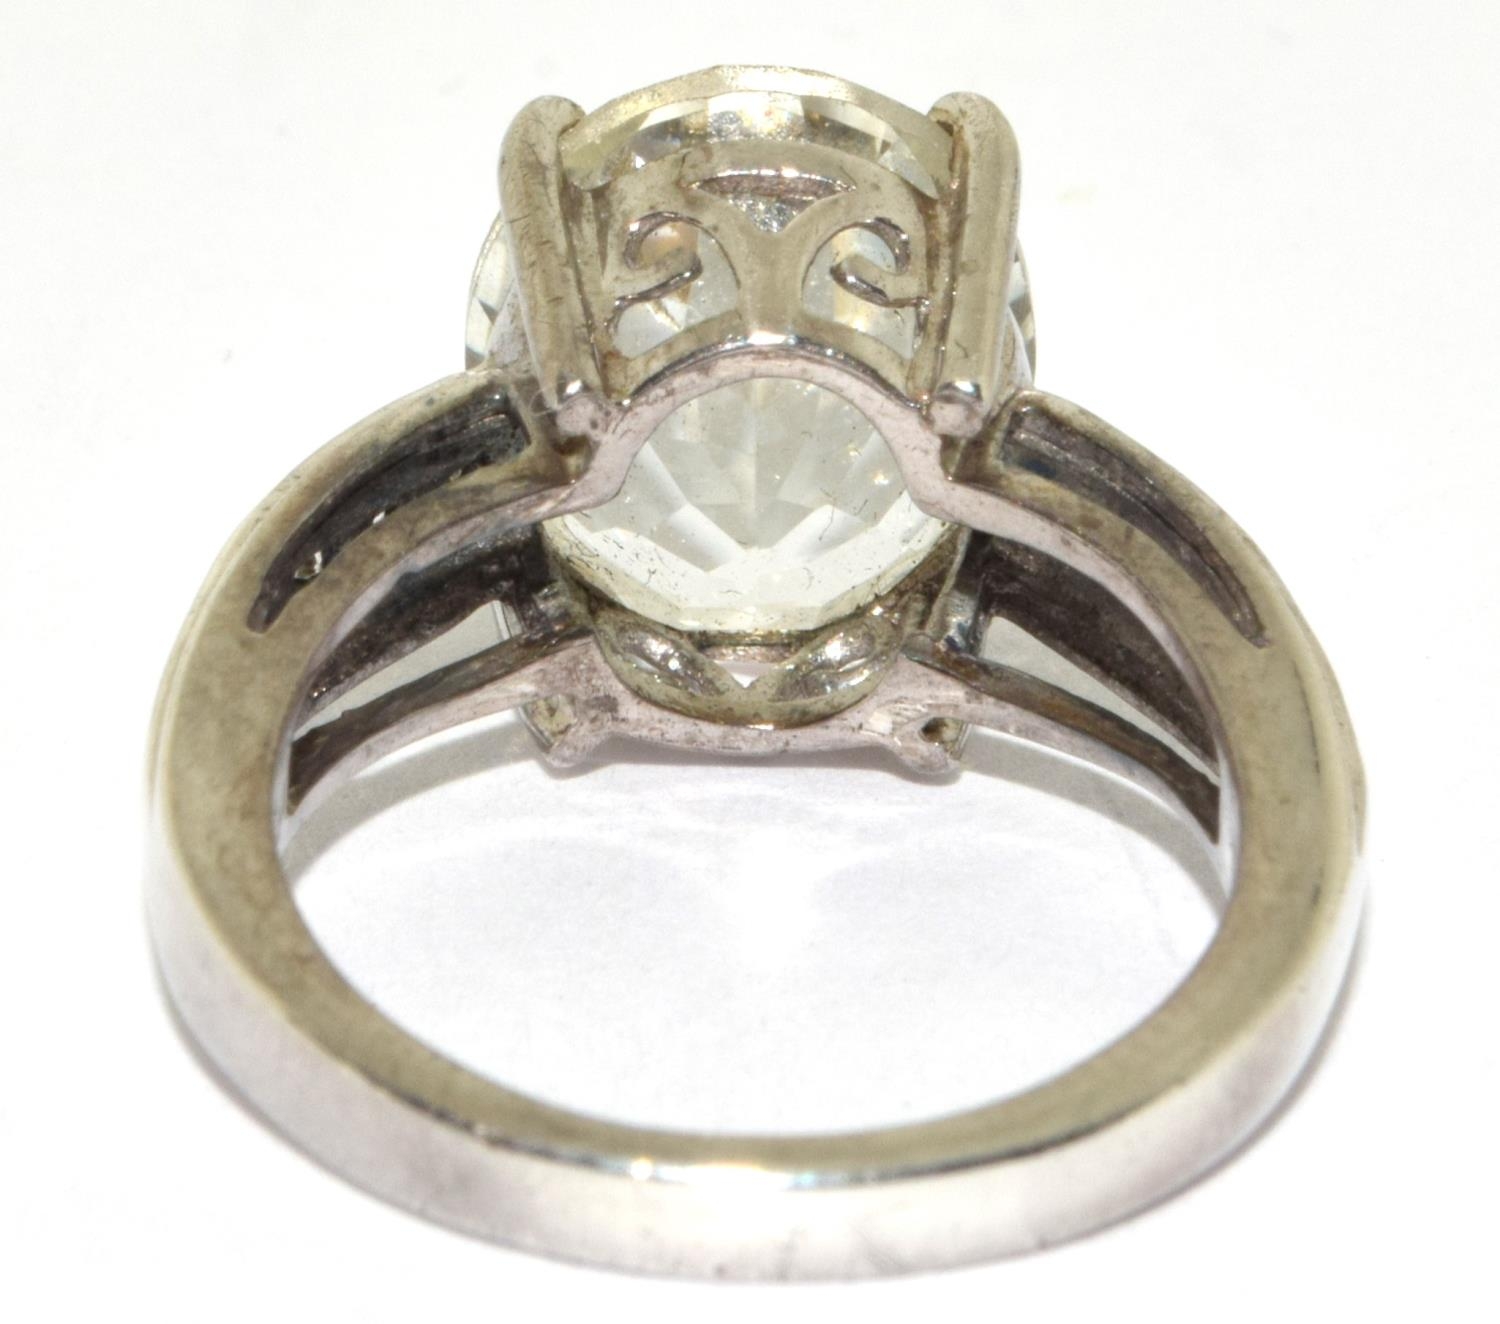 Green amethyst W/G on silver ring size L - Image 3 of 3